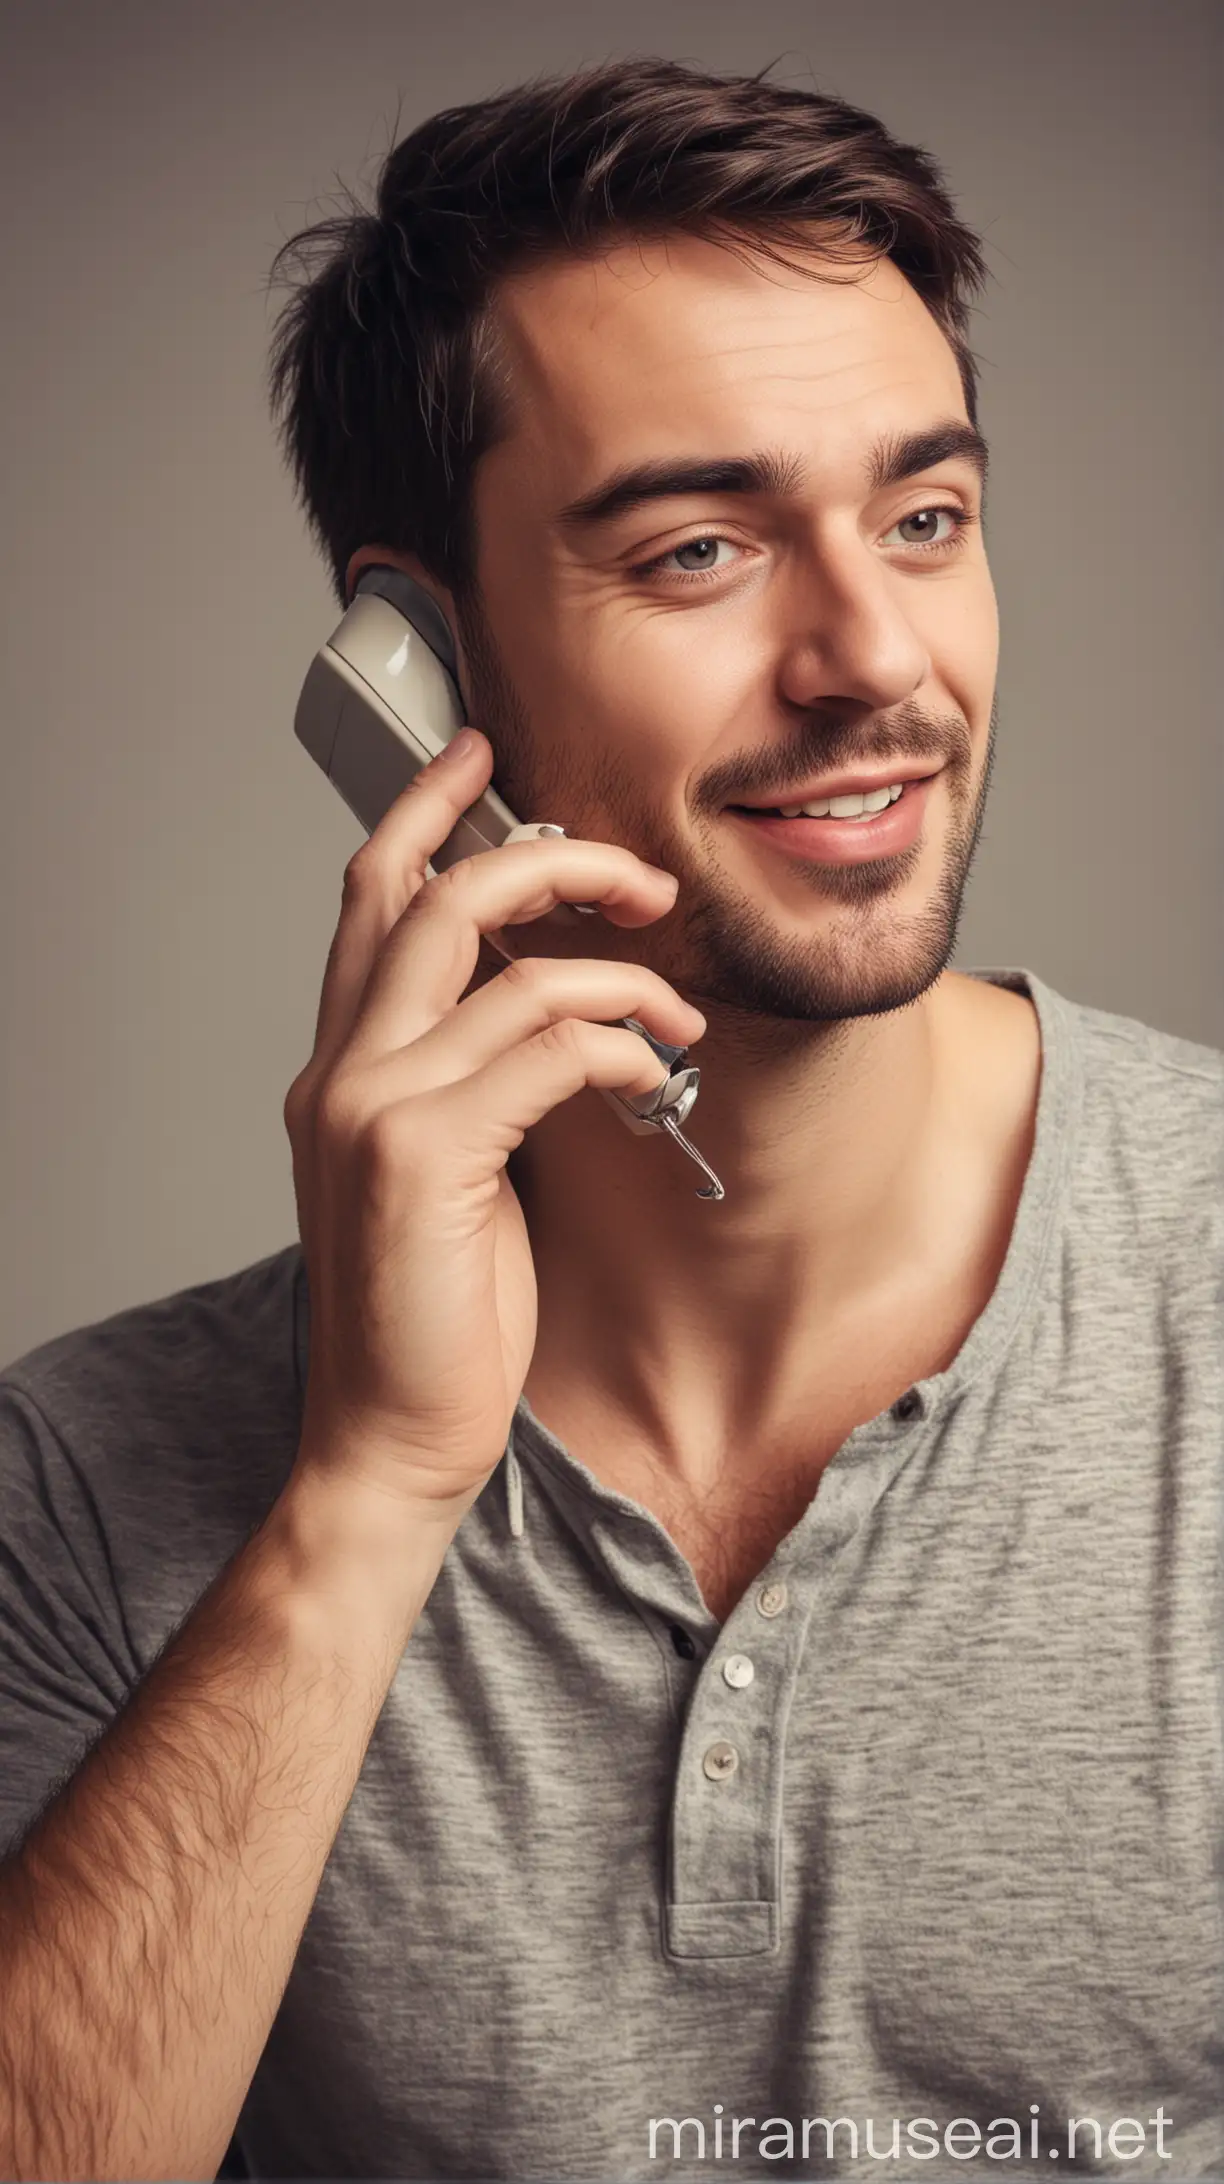 Romantic Man Talking on Phone with Affection